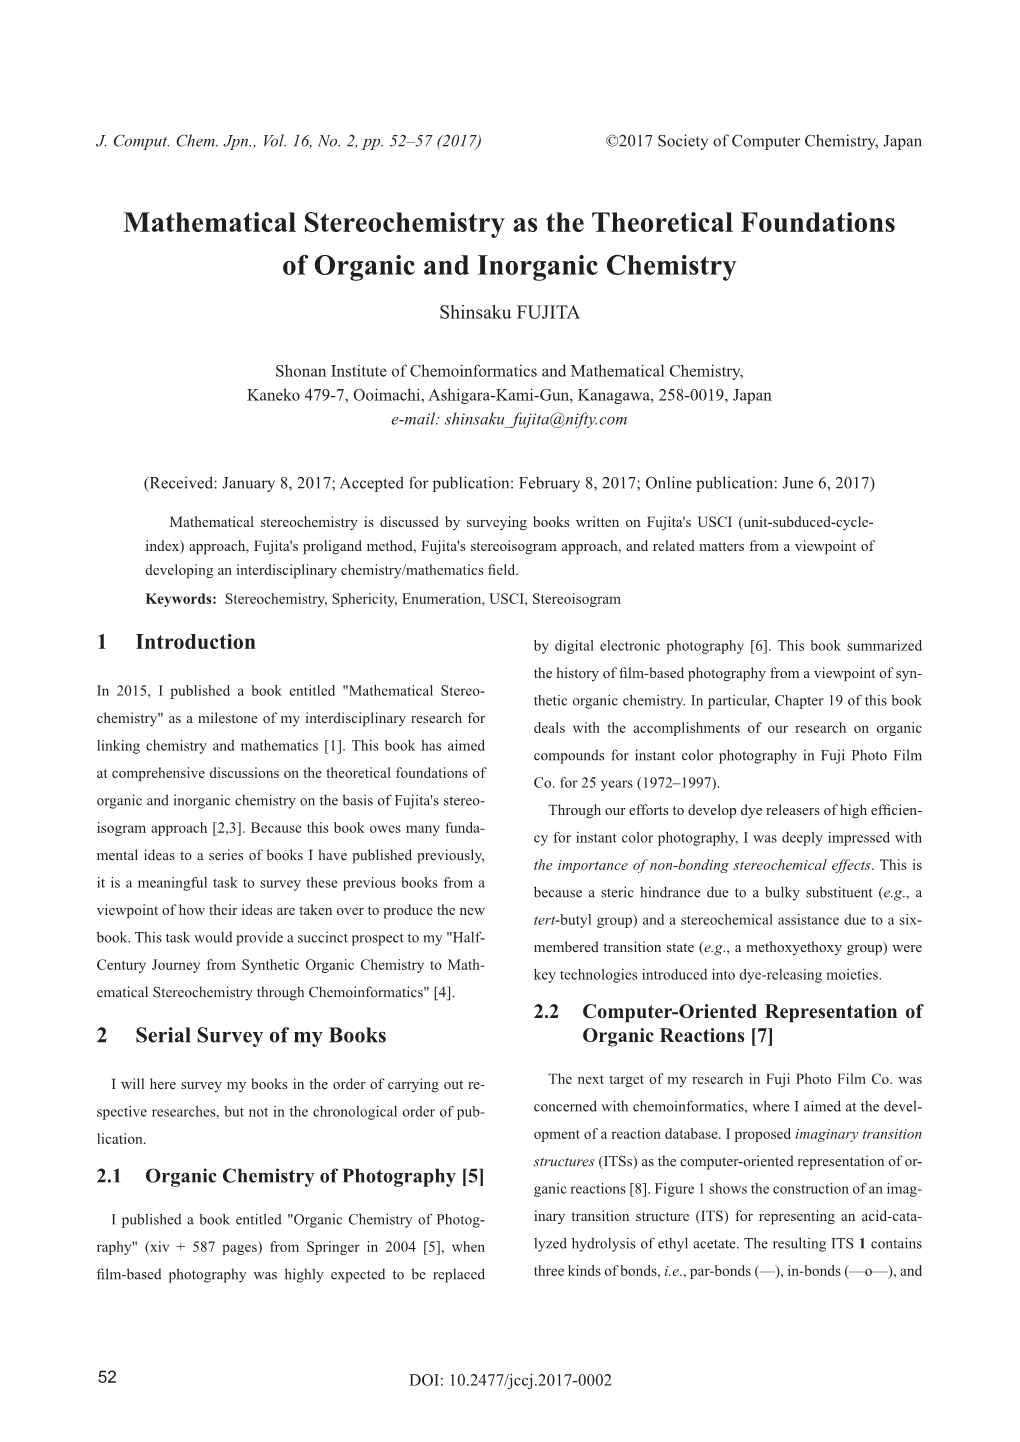 Mathematical Stereochemistry As the Theoretical Foundations of Organic and Inorganic Chemistry